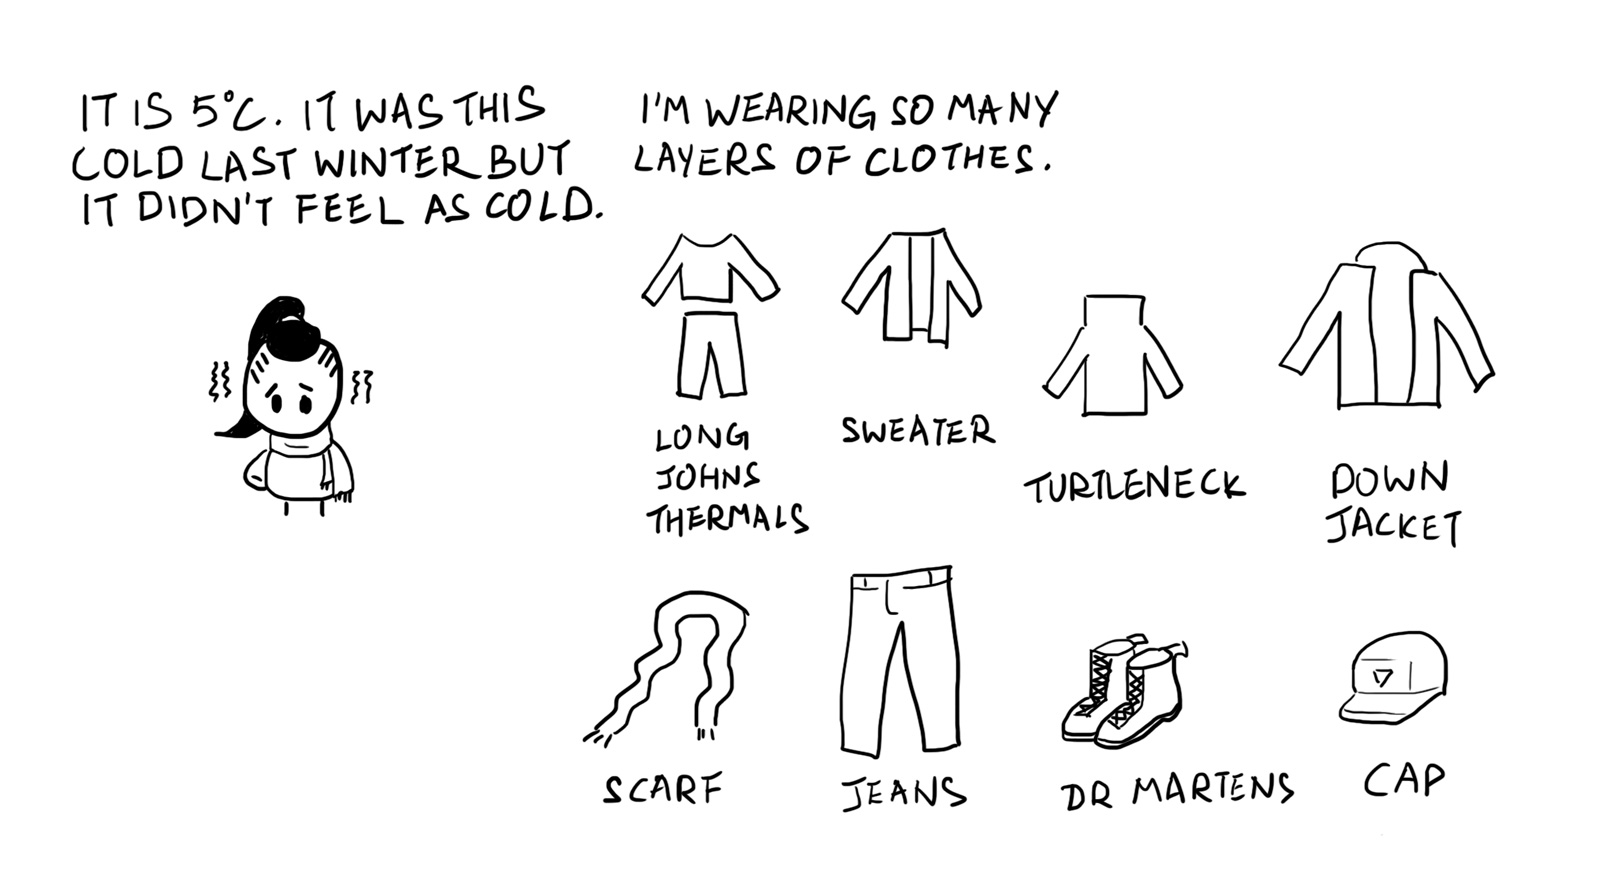 Layers of clothes